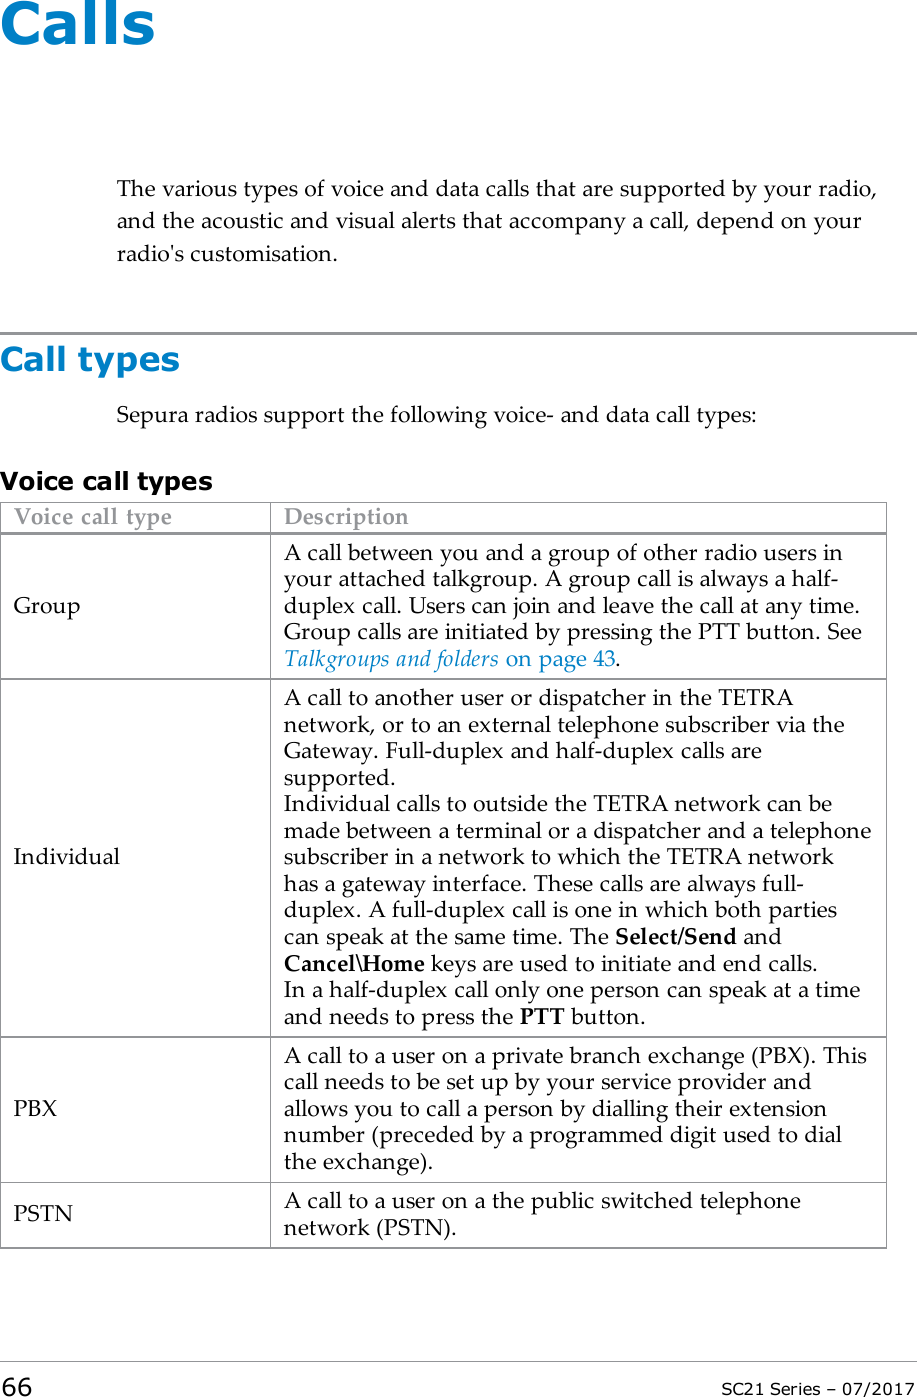 CallsThe various types of voice and data calls that are supported by your radio,and the acoustic and visual alerts that accompany a call, depend on yourradio&apos;s customisation.Call typesSepura radios support the following voice- and data call types:Voice call typesVoice call type DescriptionGroupA call between you and a group of other radio users inyour attached talkgroup. A group call is always a half-duplex call. Users can join and leave the call at any time.Group calls are initiated by pressing the PTT button. SeeTalkgroups and folders on page43.IndividualA call to another user or dispatcher in the TETRAnetwork, or to an external telephone subscriber via theGateway. Full-duplex and half-duplex calls aresupported.Individual calls to outside the TETRA network can bemade between a terminal or a dispatcher and a telephonesubscriber in a network to which the TETRA networkhas a gateway interface. These calls are always full-duplex. A full-duplex call is one in which both partiescan speak at the same time. The Select/Send andCancel\Home keys are used to initiate and end calls.In a half-duplex call only one person can speak at a timeand needs to press the PTT button.PBXA call to a user on a private branch exchange (PBX). Thiscall needs to be set up by your service provider andallows you to call a person by dialling their extensionnumber (preceded by a programmed digit used to dialthe exchange).PSTN A call to a user on a the public switched telephonenetwork (PSTN).66 SC21 Series – 07/2017